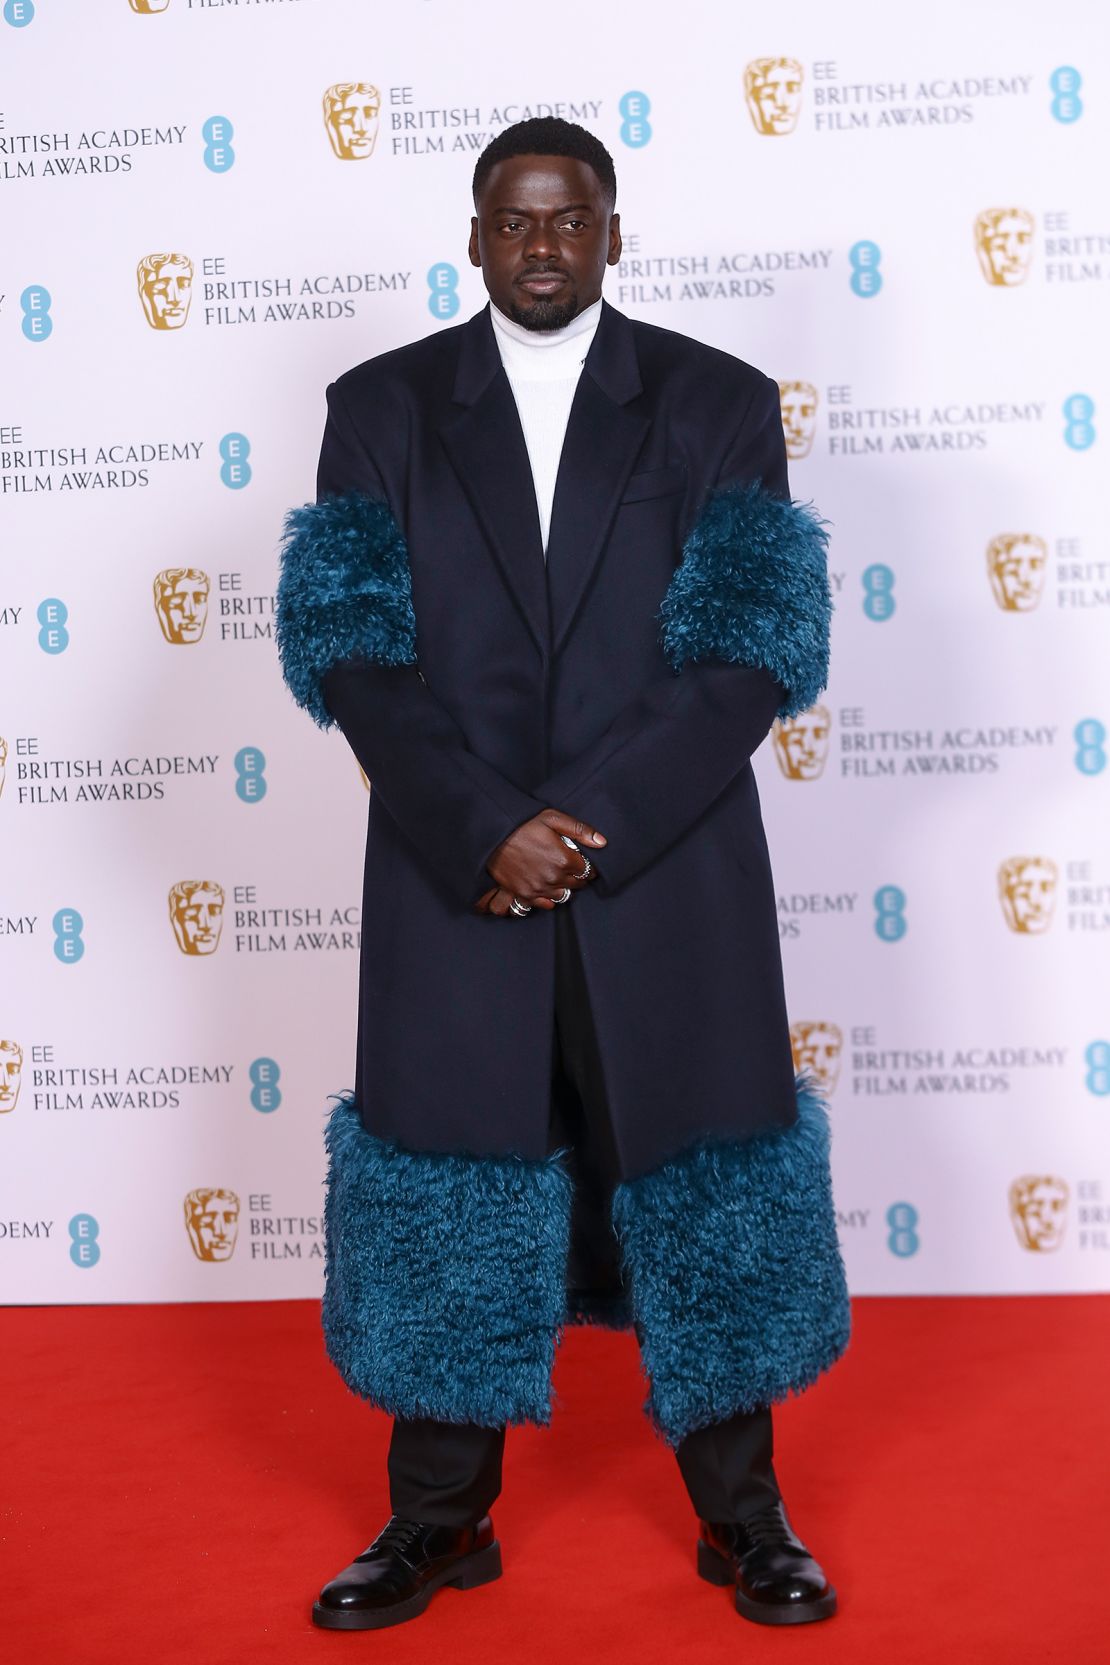 All the best looks from the BAFTA Awards 2022 in London